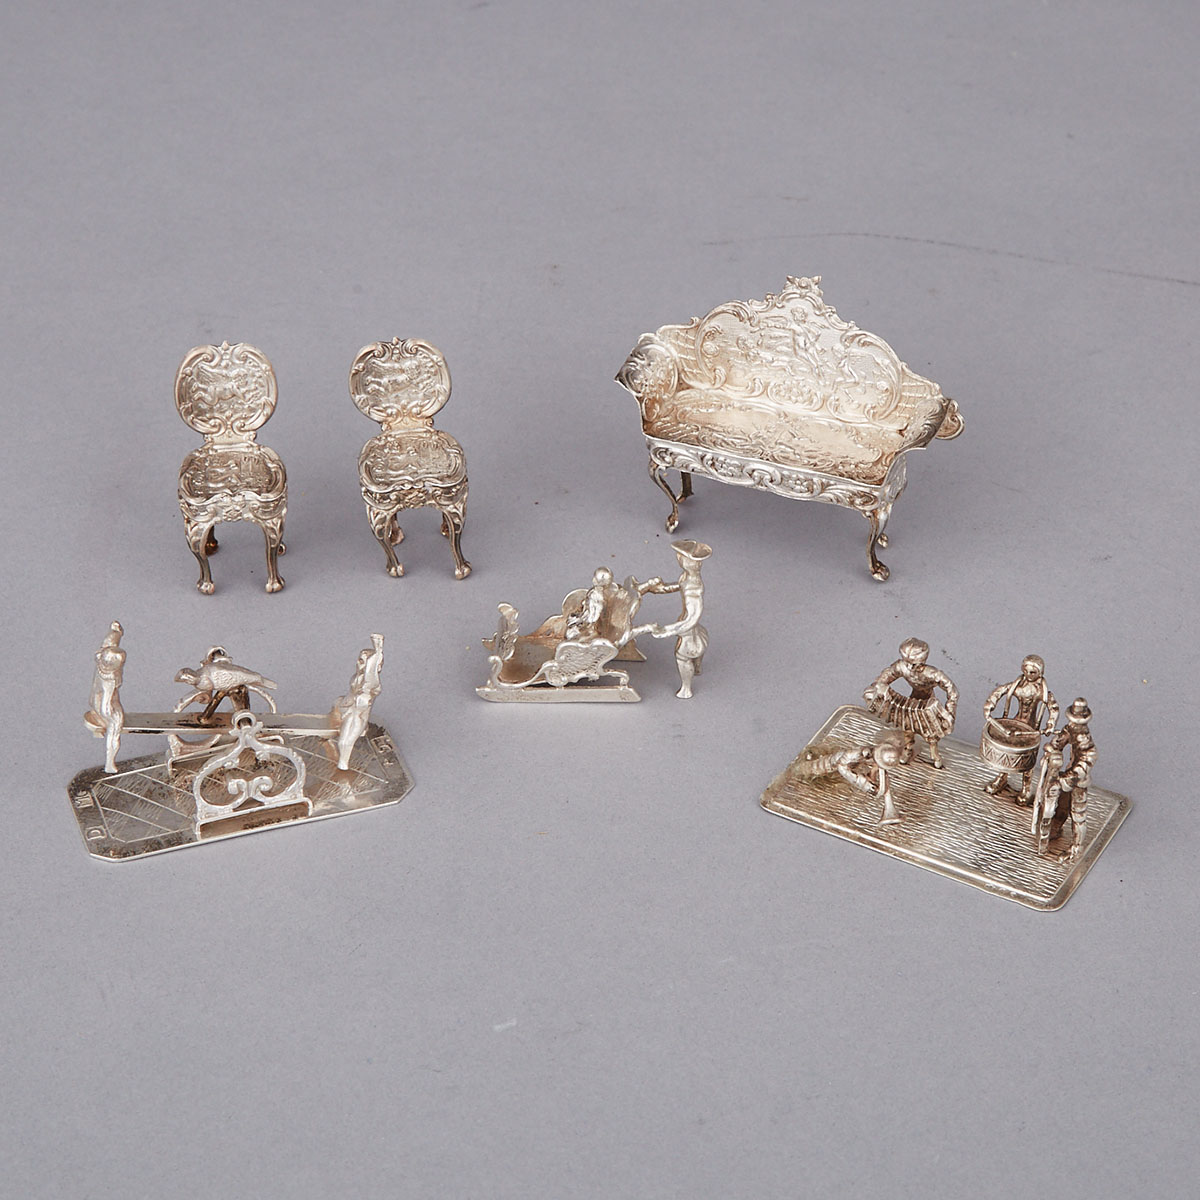 Three Dutch Silver Miniature Novelty Groups and an English Settee and Two Chairs, 20th century